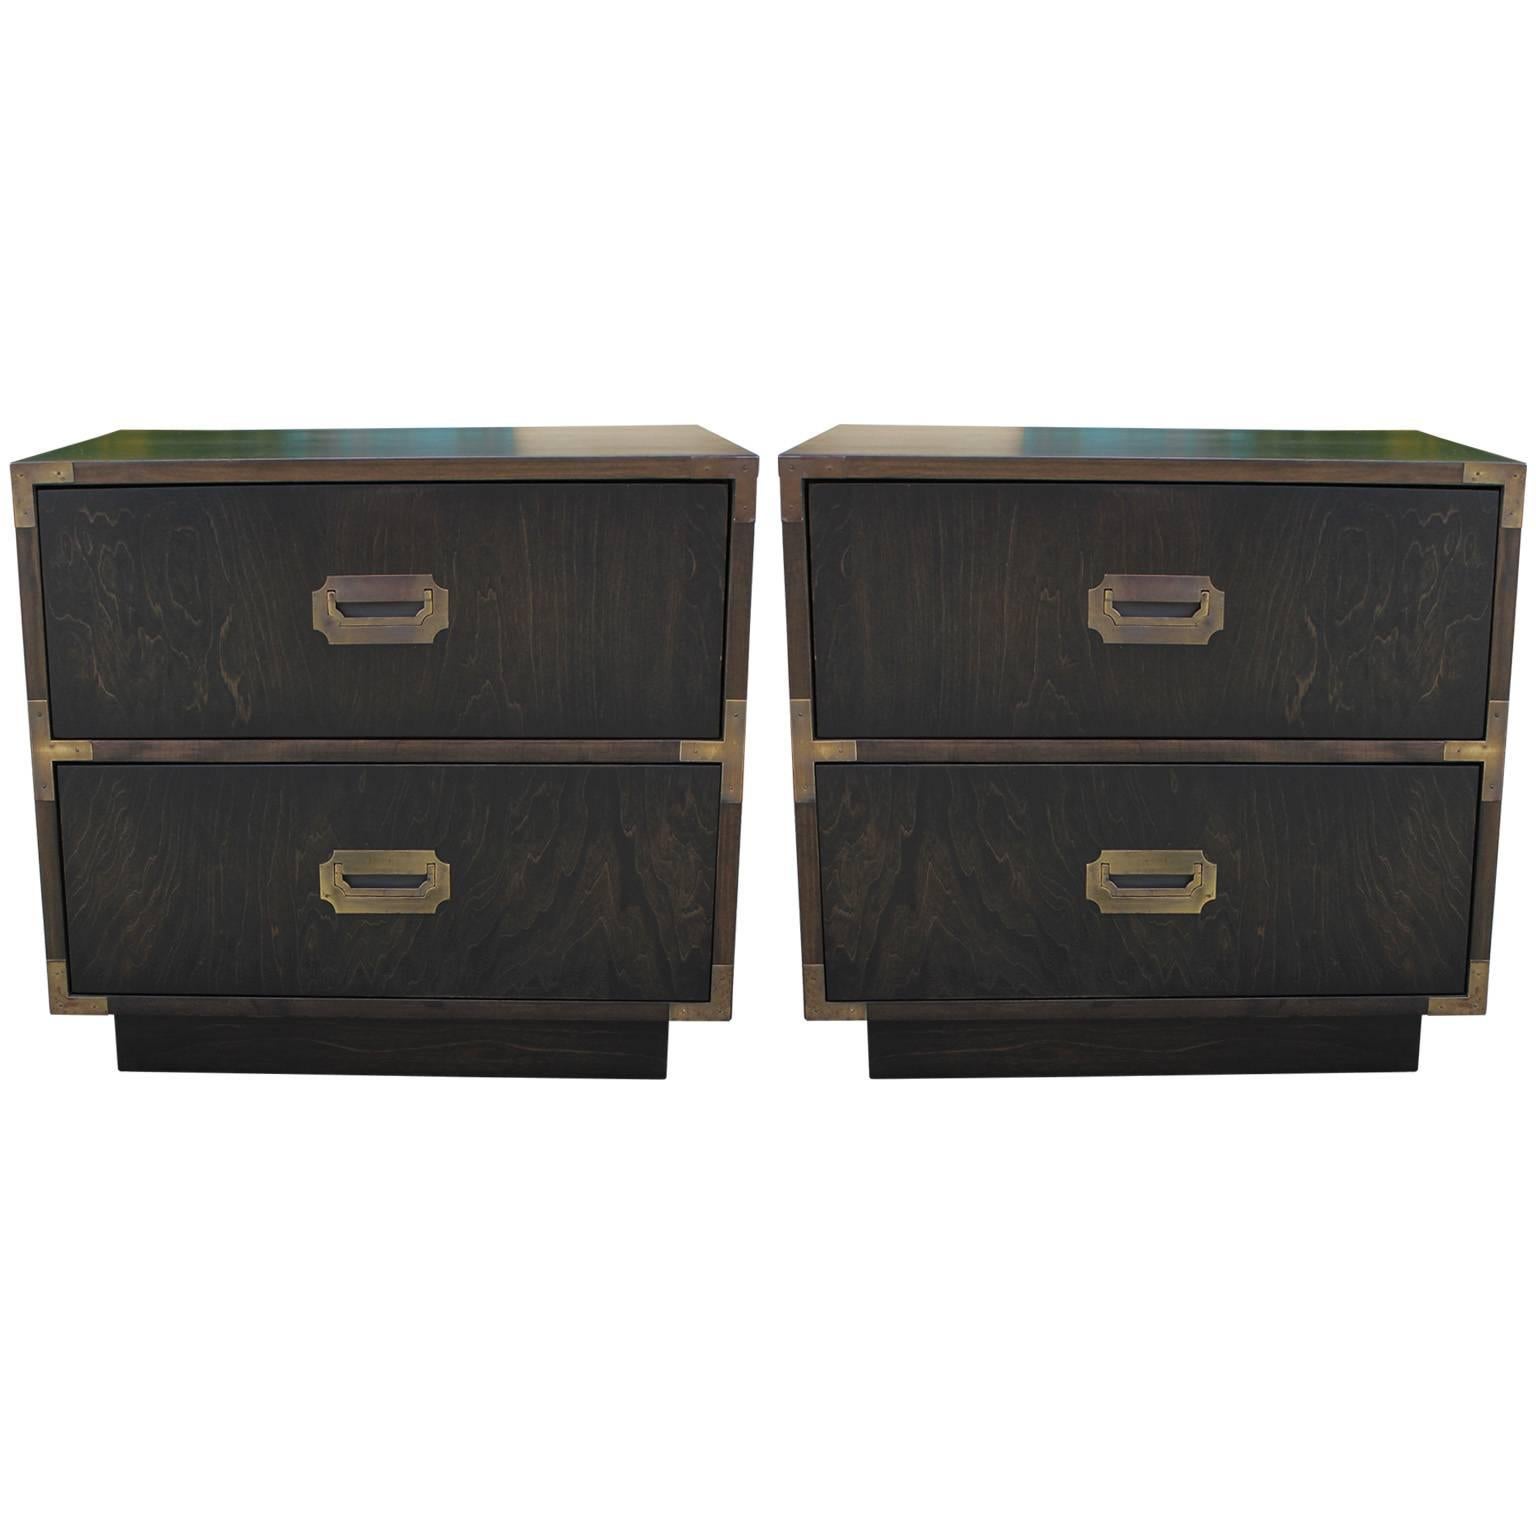 Excellent pair of Campaign style nightstands or end tables. Tables are finished in an ebony stain. Brass hardware has a wonderful patina. Newly restored. Made by Dixie.